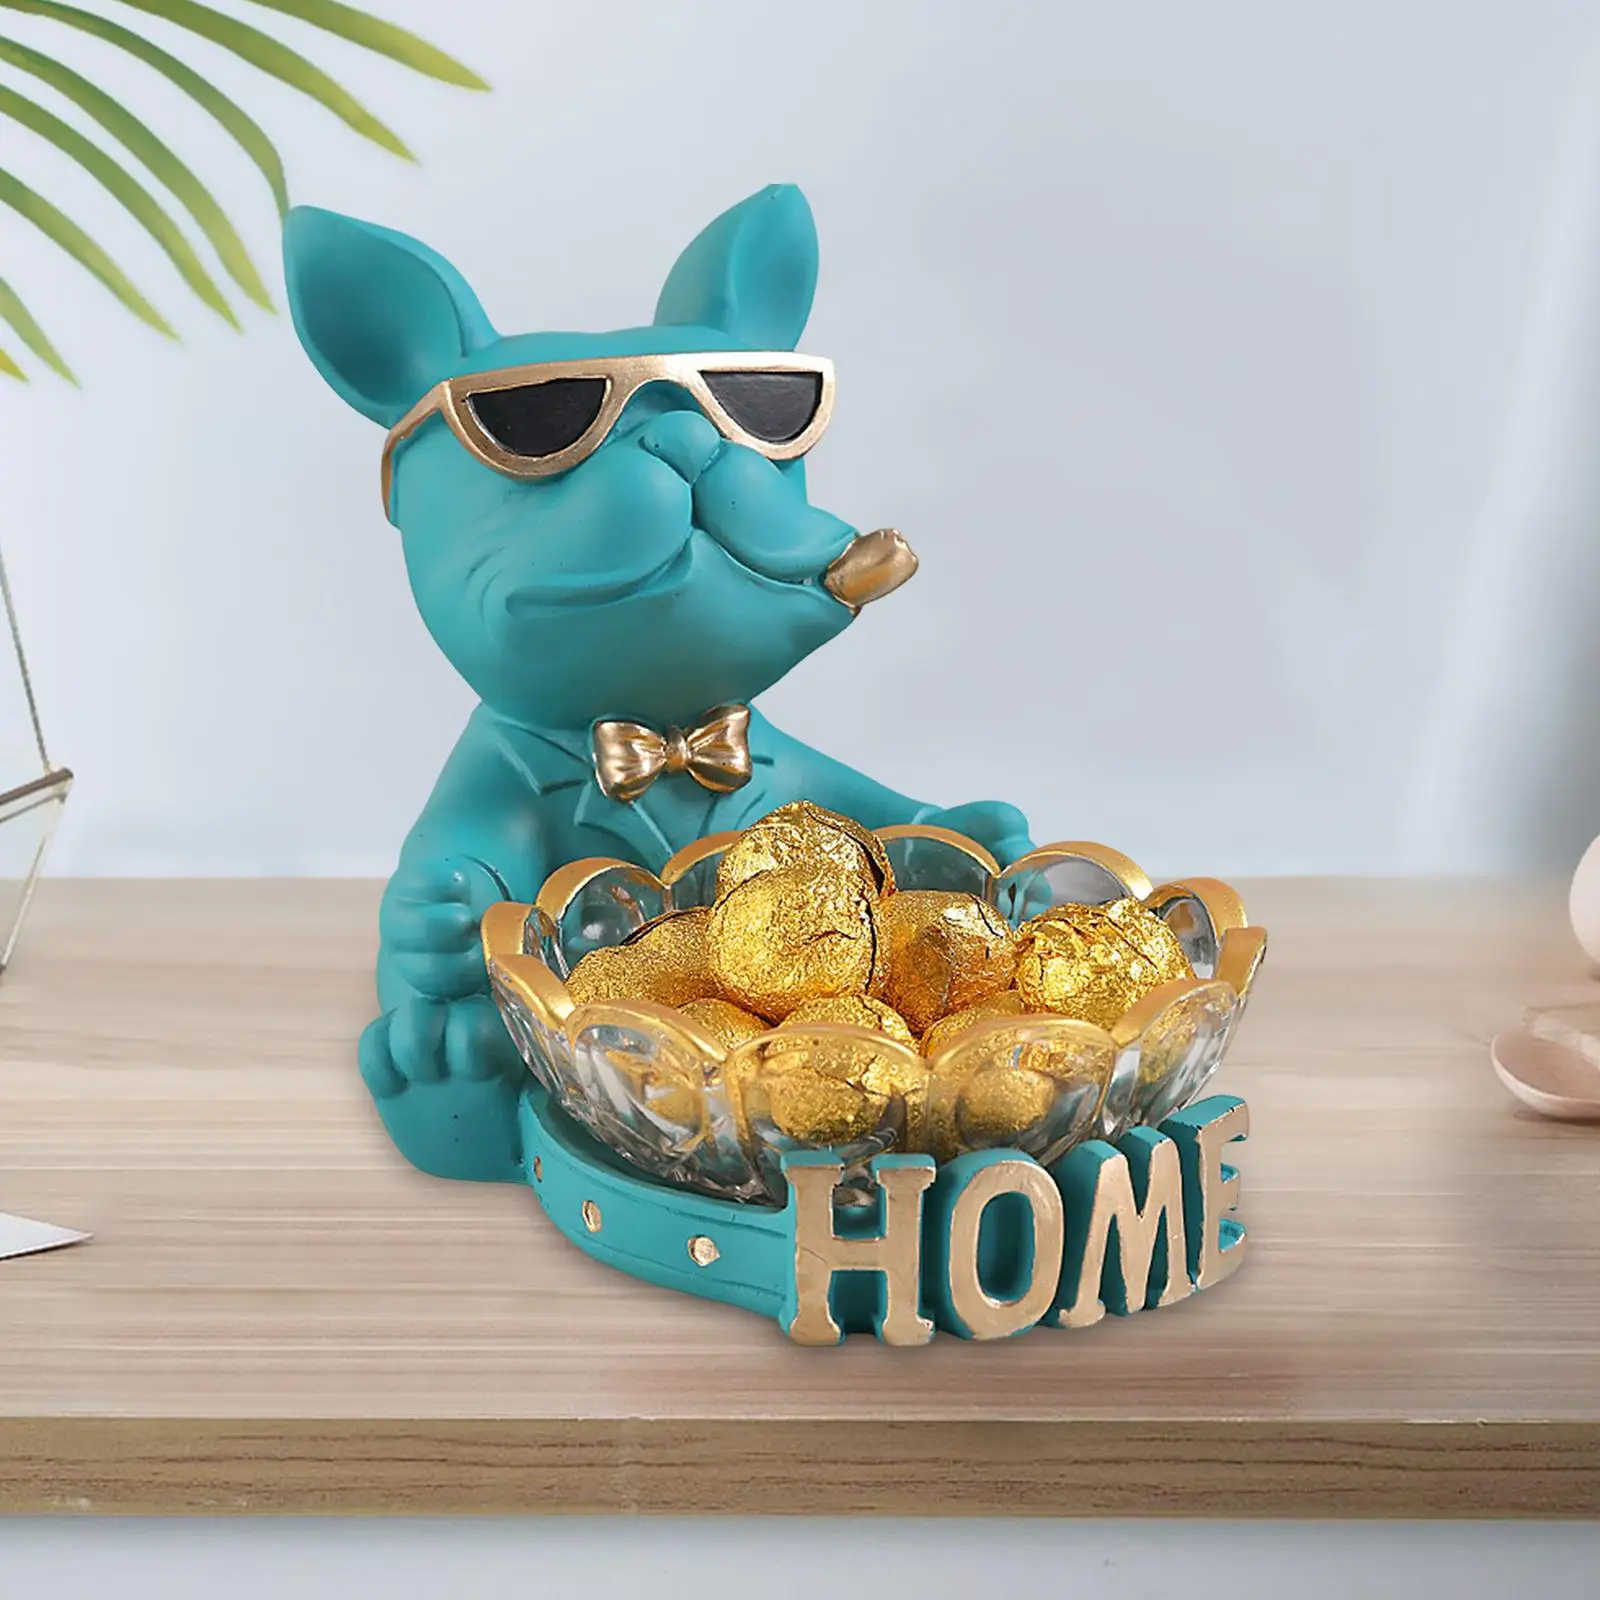 Novelty Dog Statue Figurine  Box Sundries Key Collectible Animal Sculpture  for   top Decoration Ornament